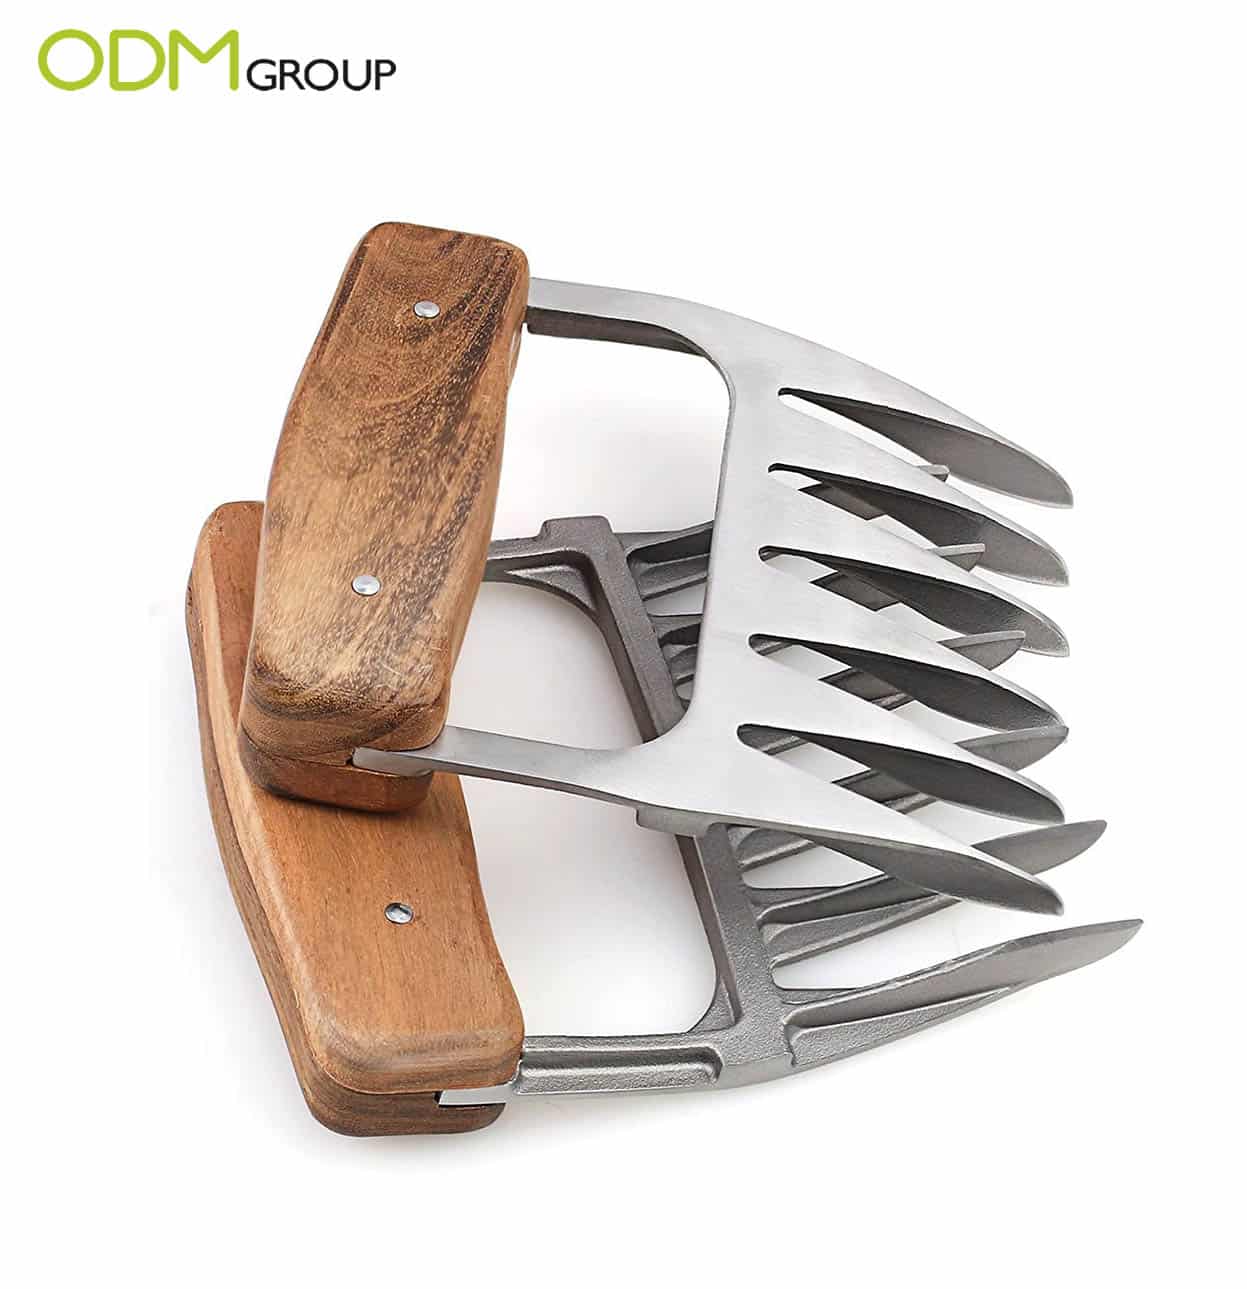 Branded BBQ Tools